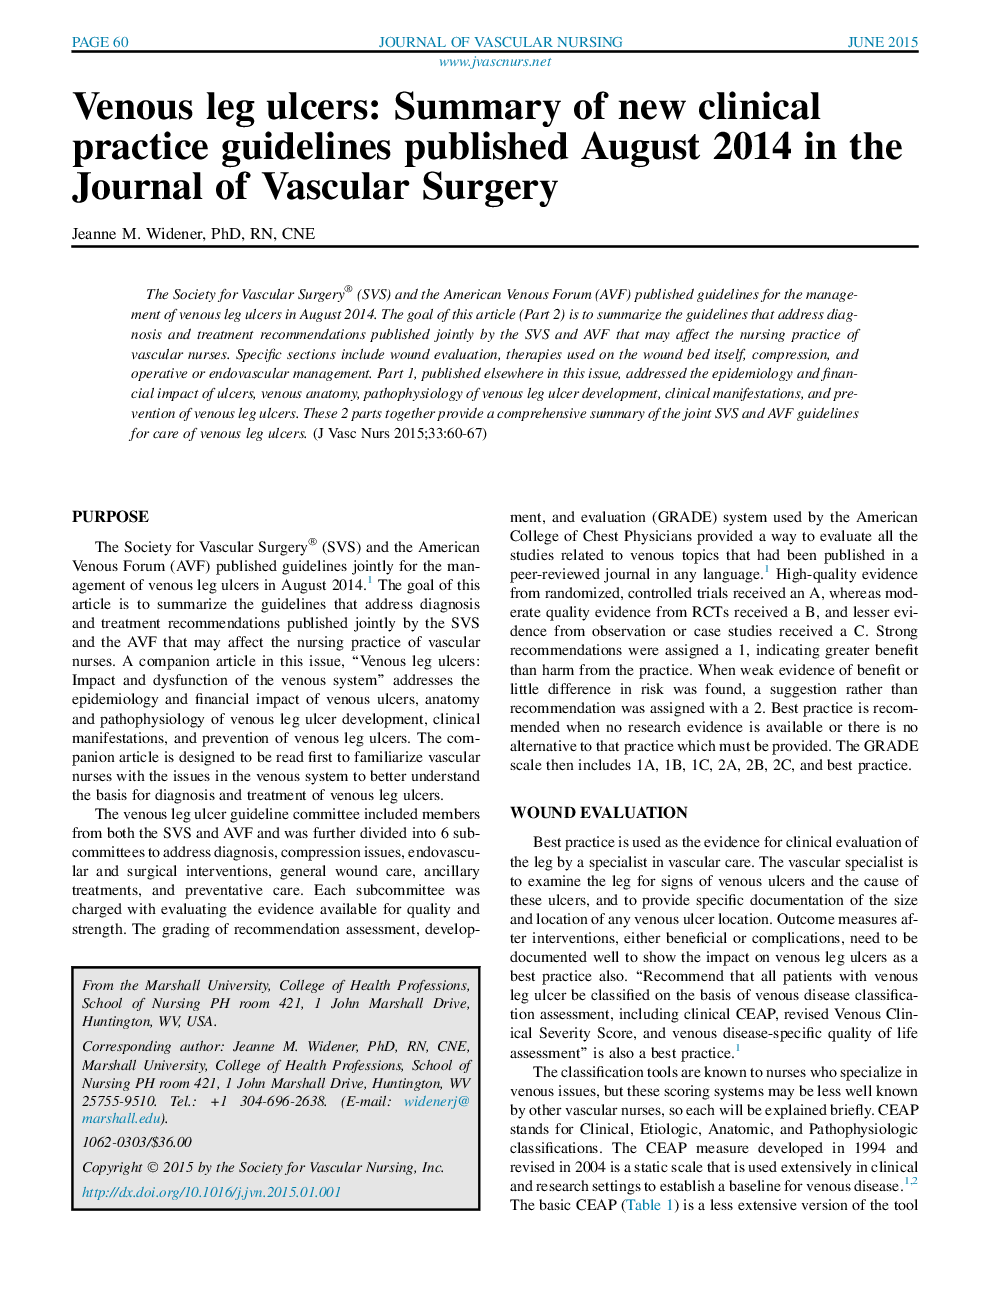 Venous leg ulcers: Summary of new clinical practice guidelines published August 2014 in the Journal of Vascular Surgery